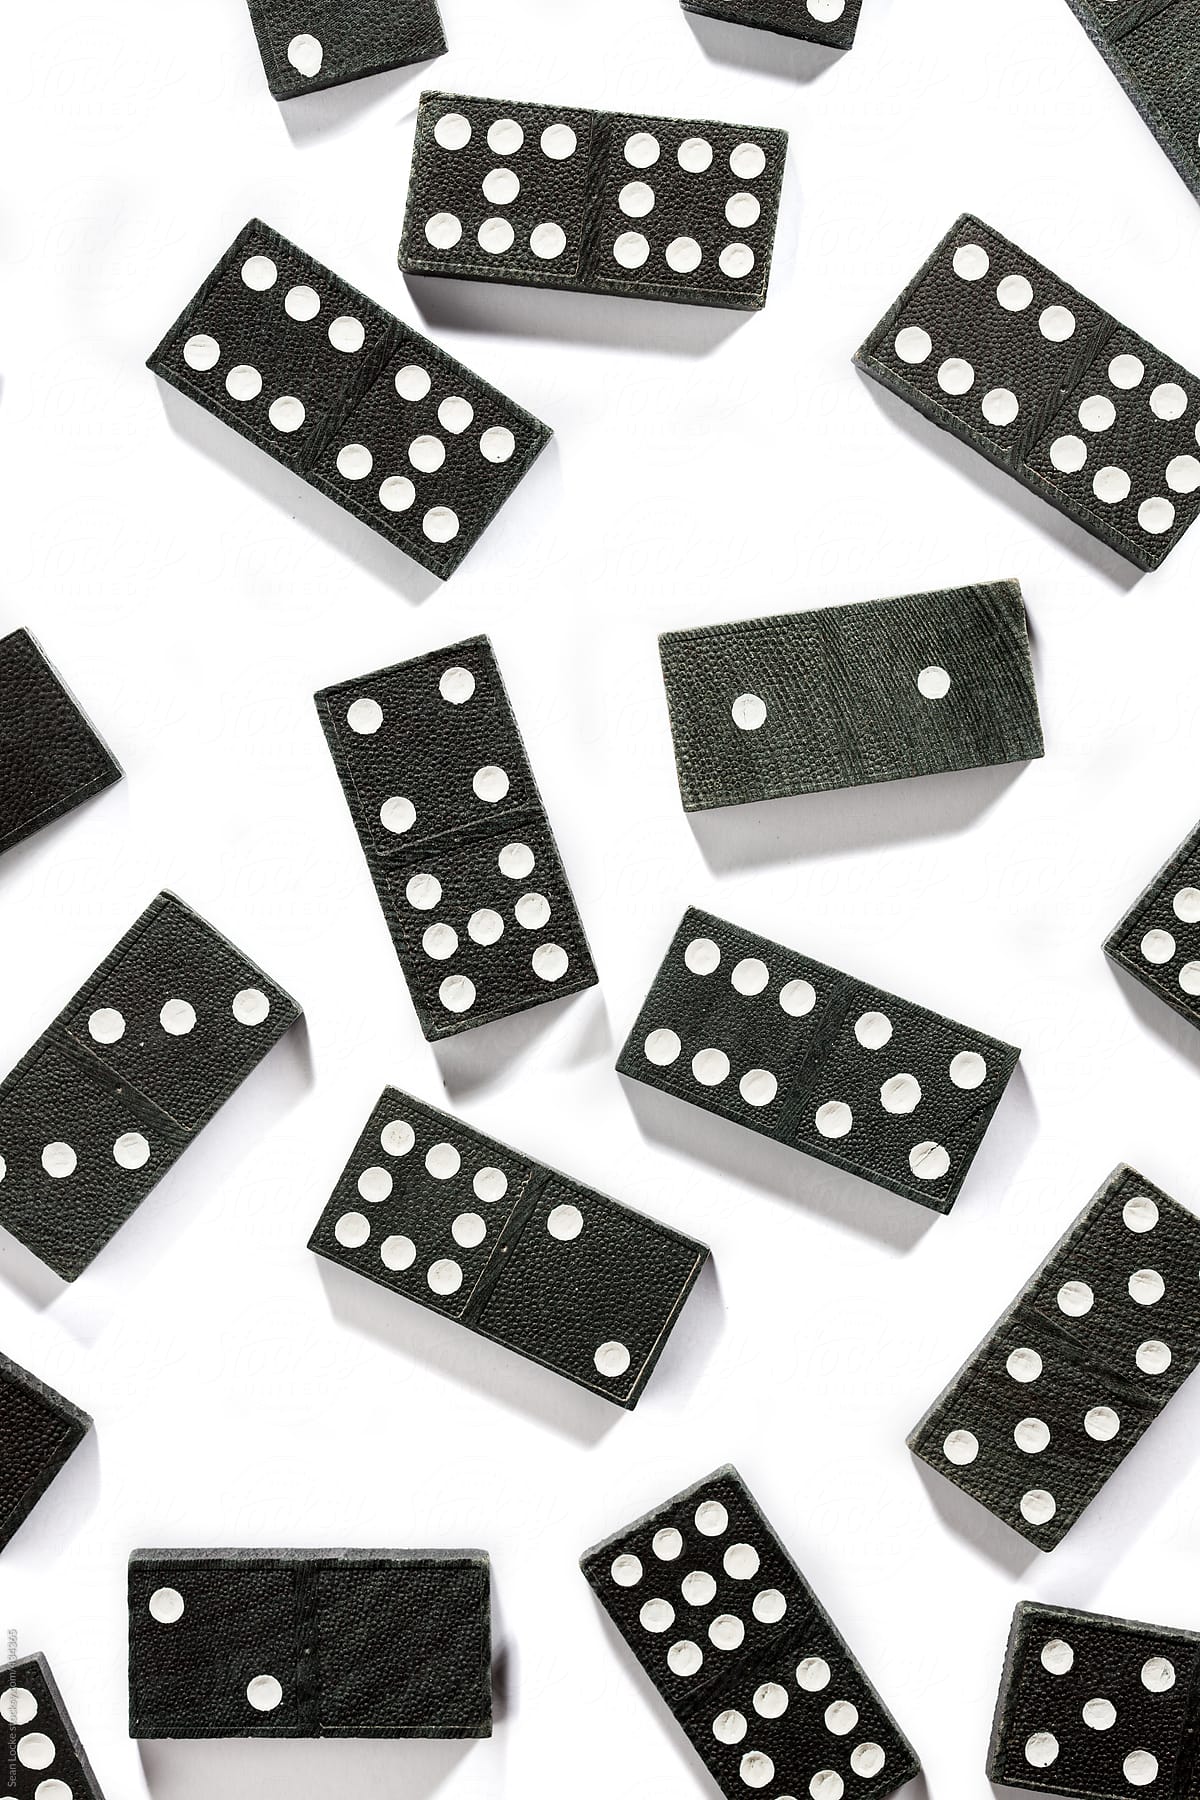 Dominoes Randomly Placed On White Background